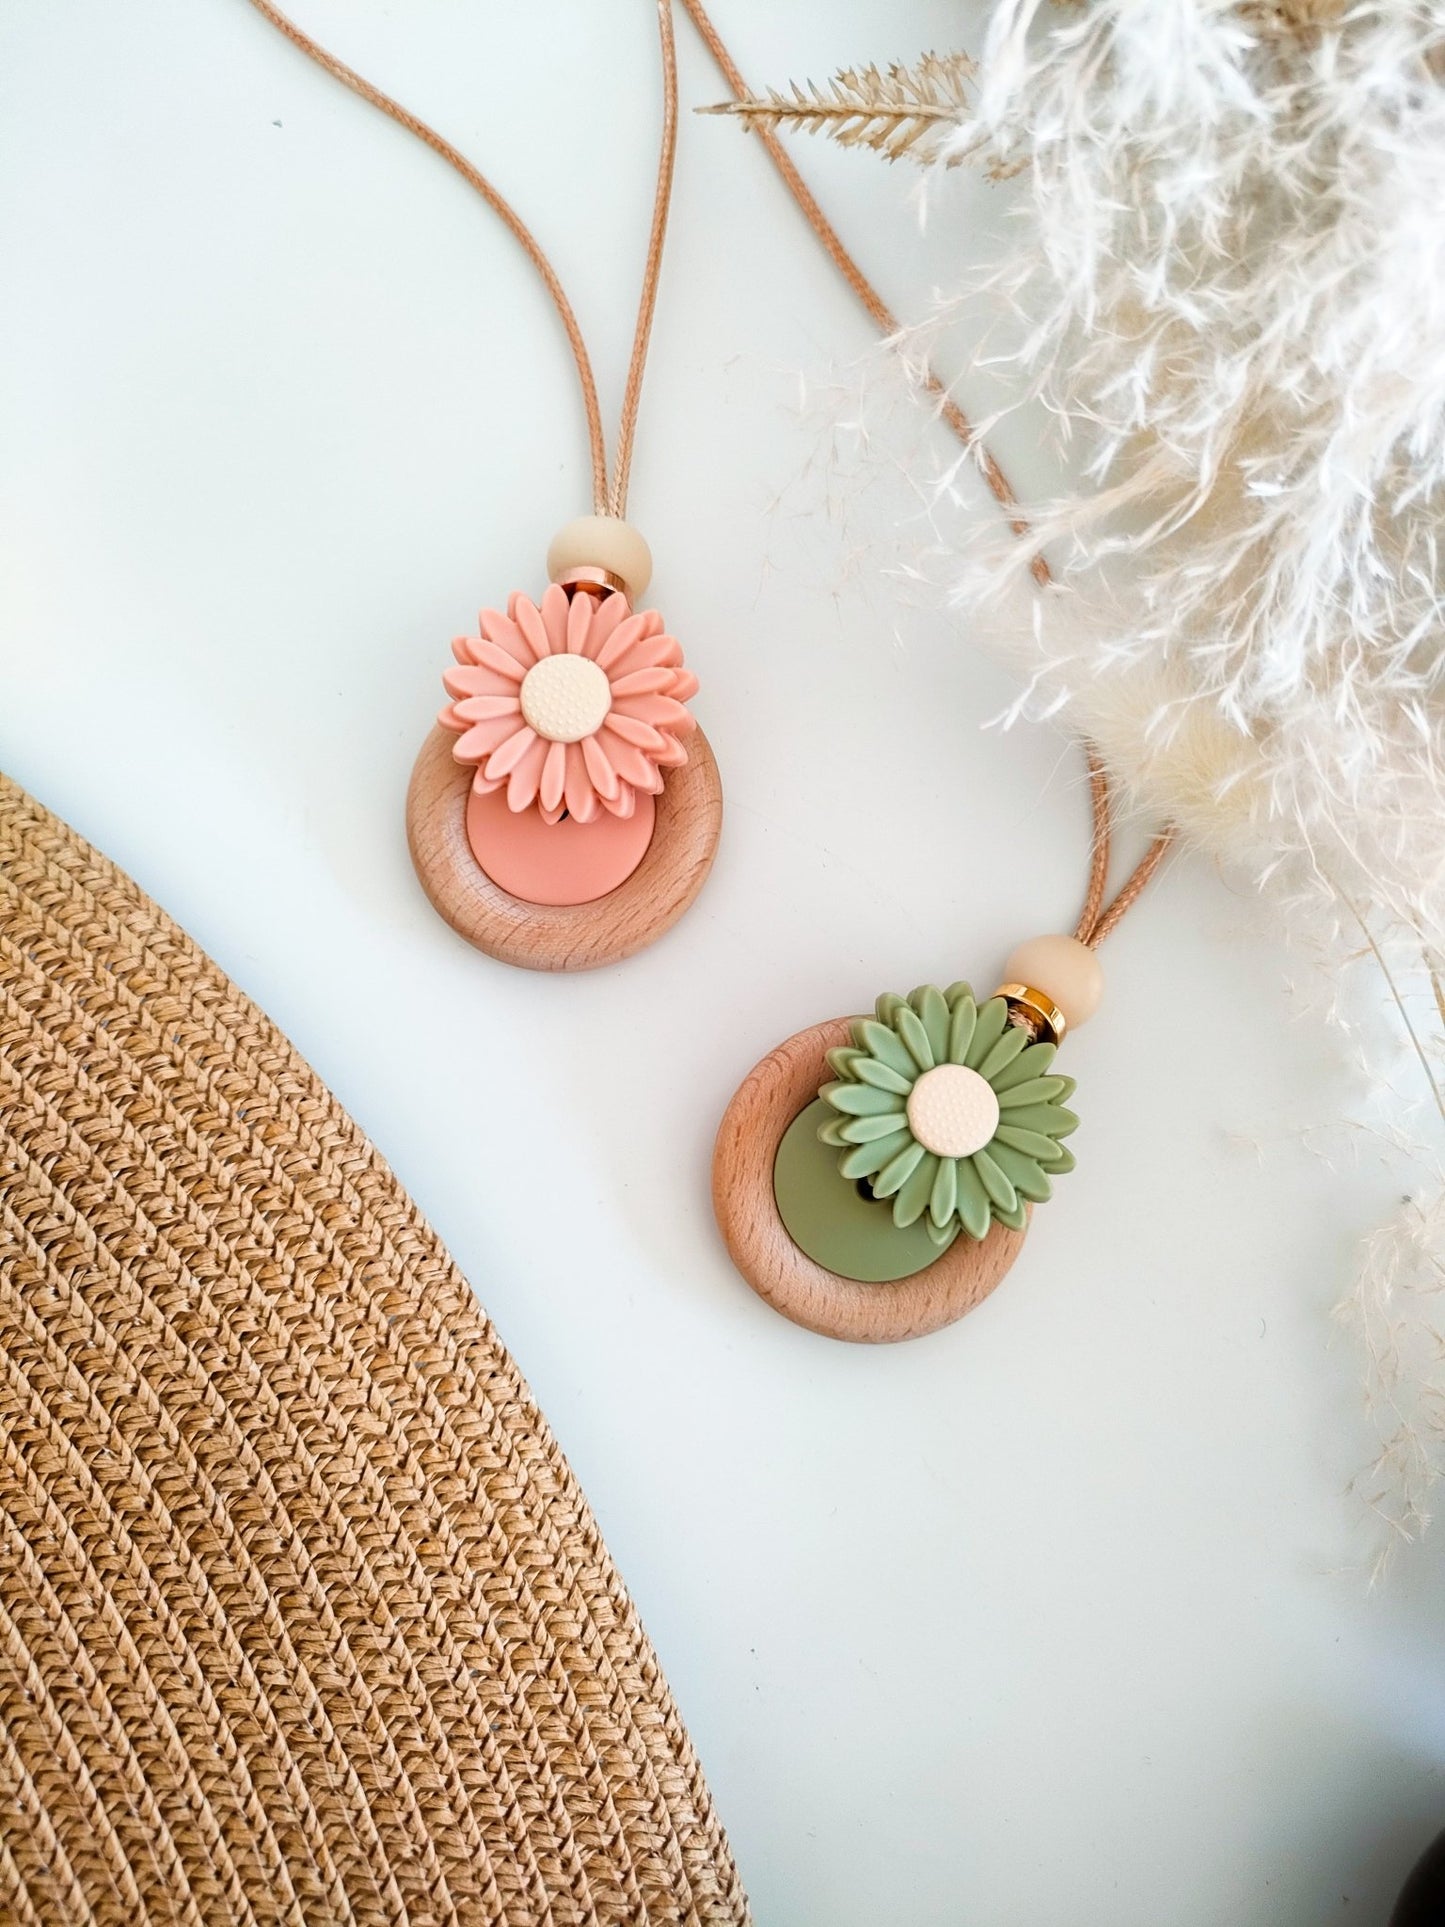 Daisy Bloom fiddle pendant in peach and sage green on white background